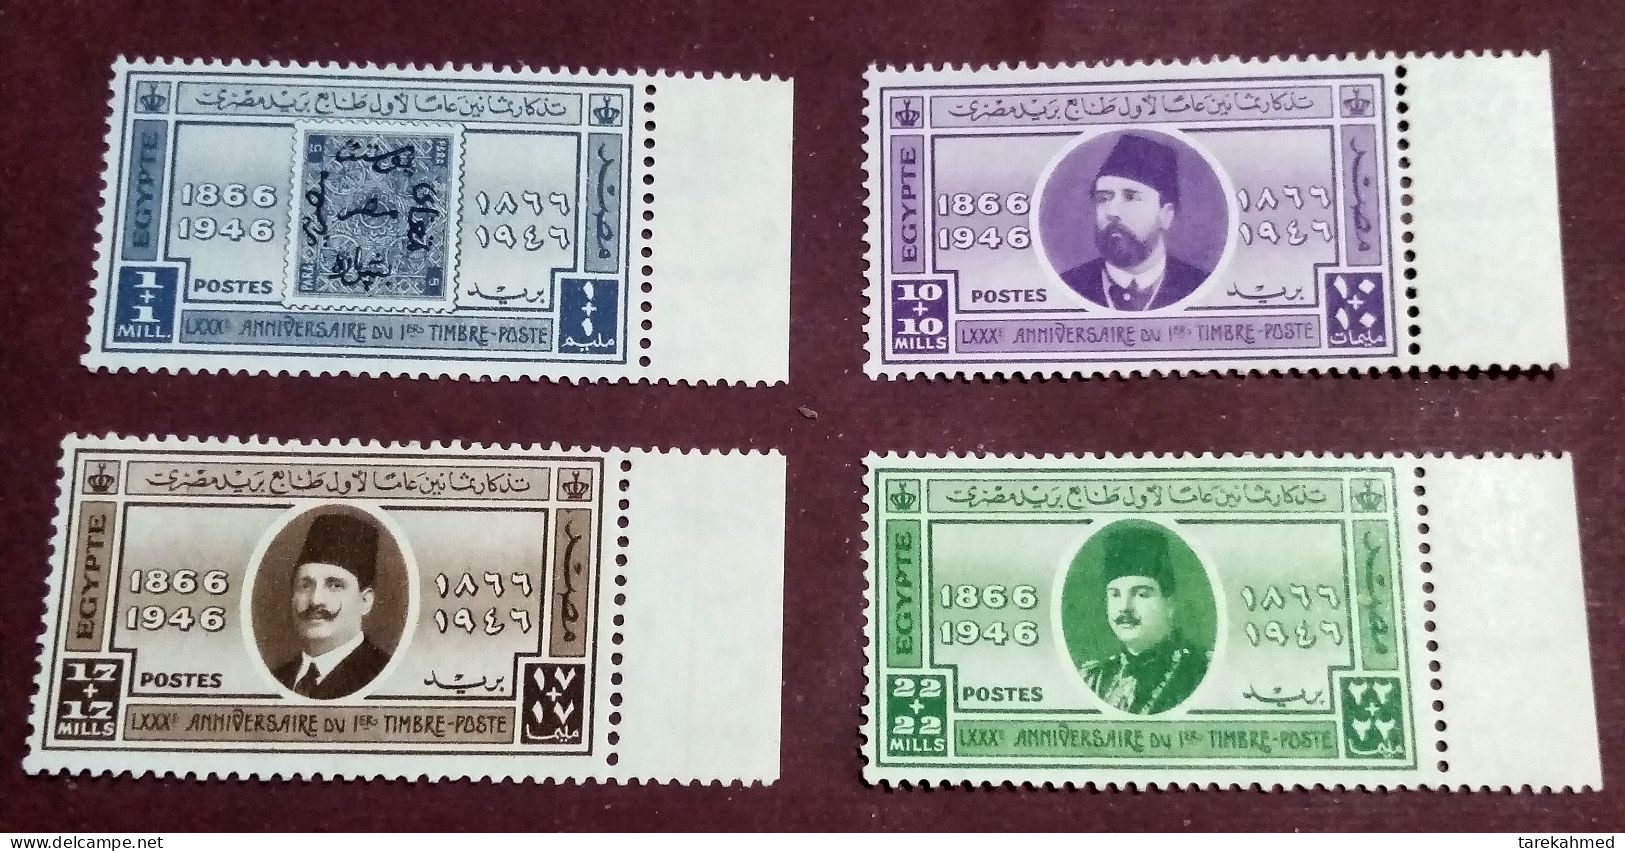 Egypt 1946 - Complete Set Of The 80th Anniv. Of Egypt’s 1st Postage Stamp - MNH With Margin, Original Gum. - Unused Stamps